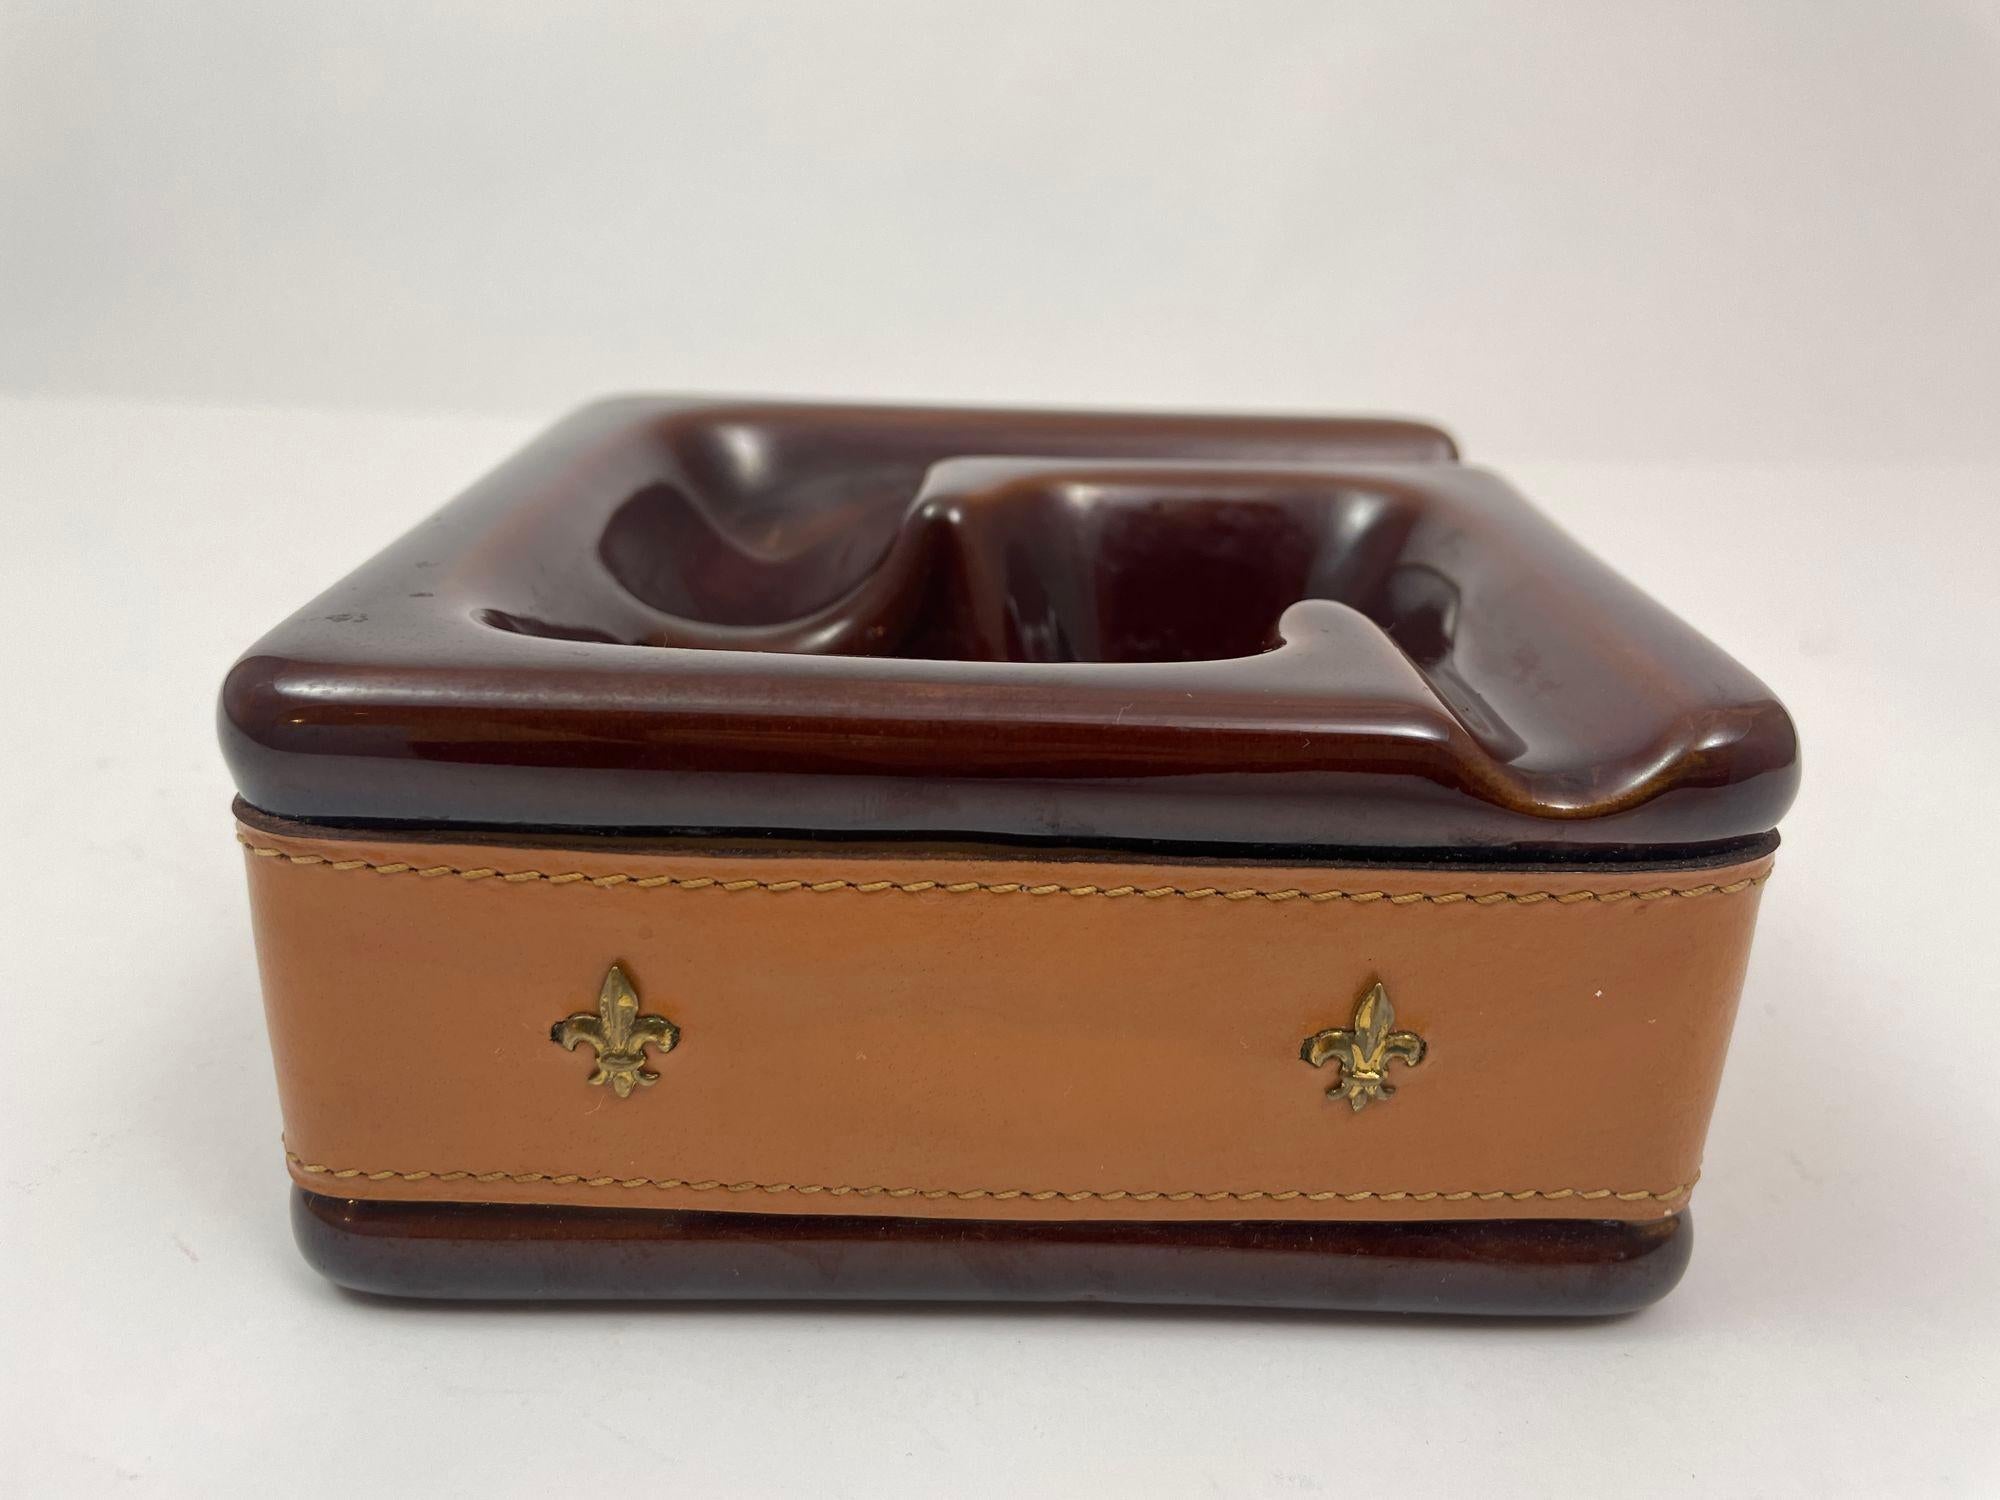 Vintage Brown Ceramic Ashtray Wrapped in Saddle Leather In Good Condition For Sale In North Hollywood, CA